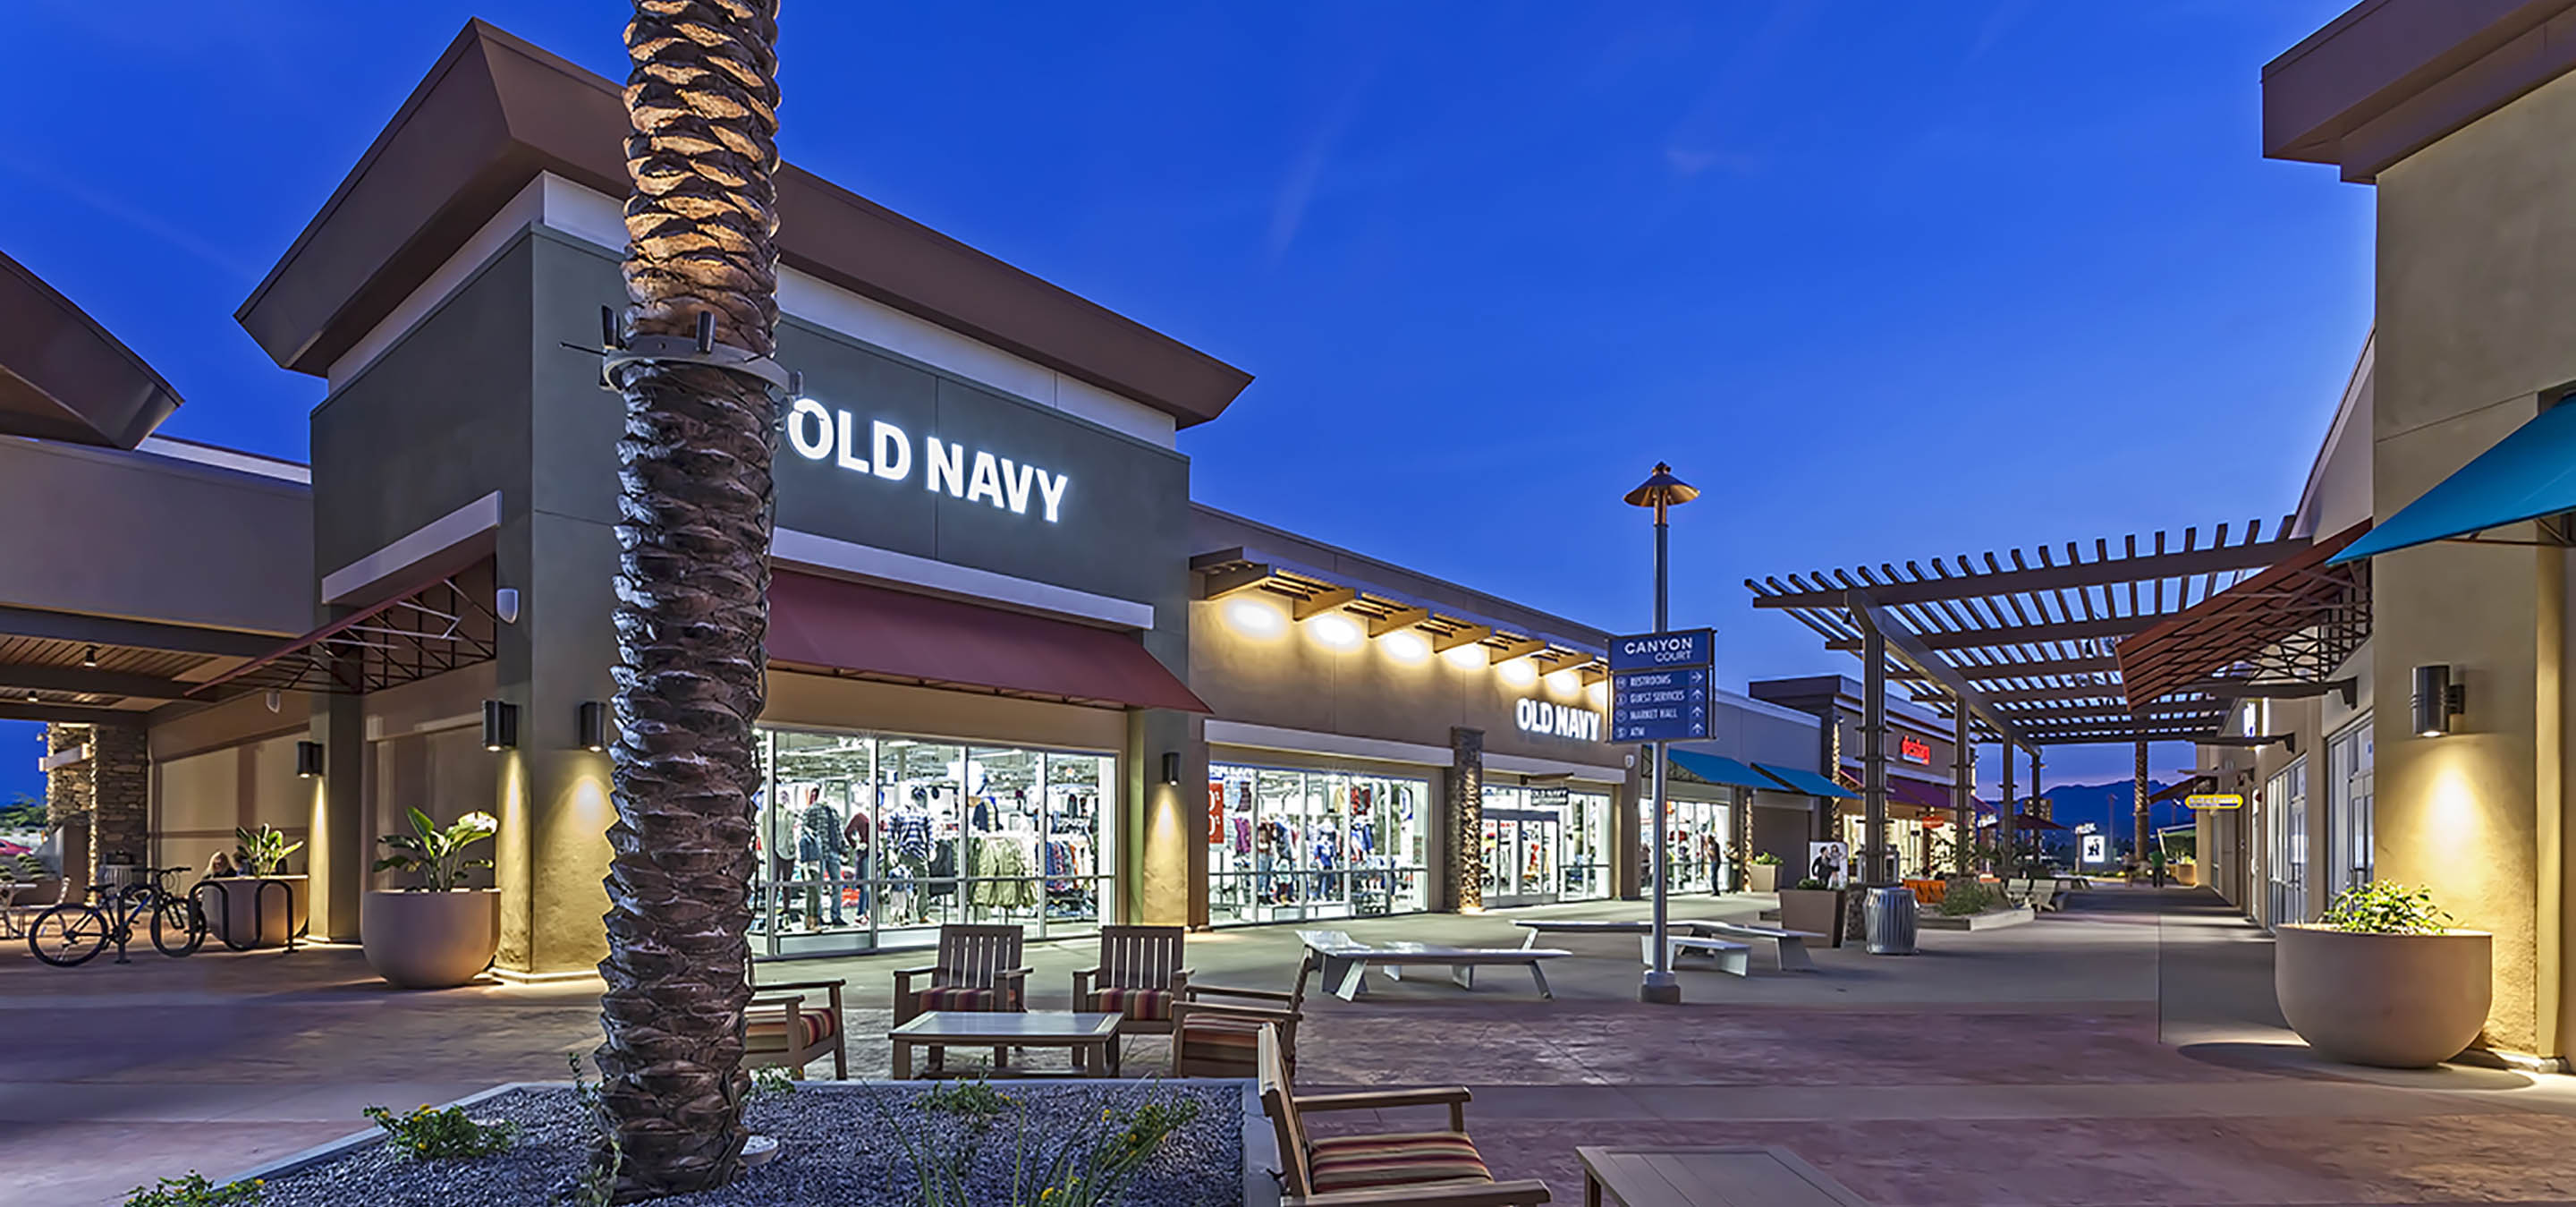 Tucson Premium Outlets: Updated store list, special offers, photos and more